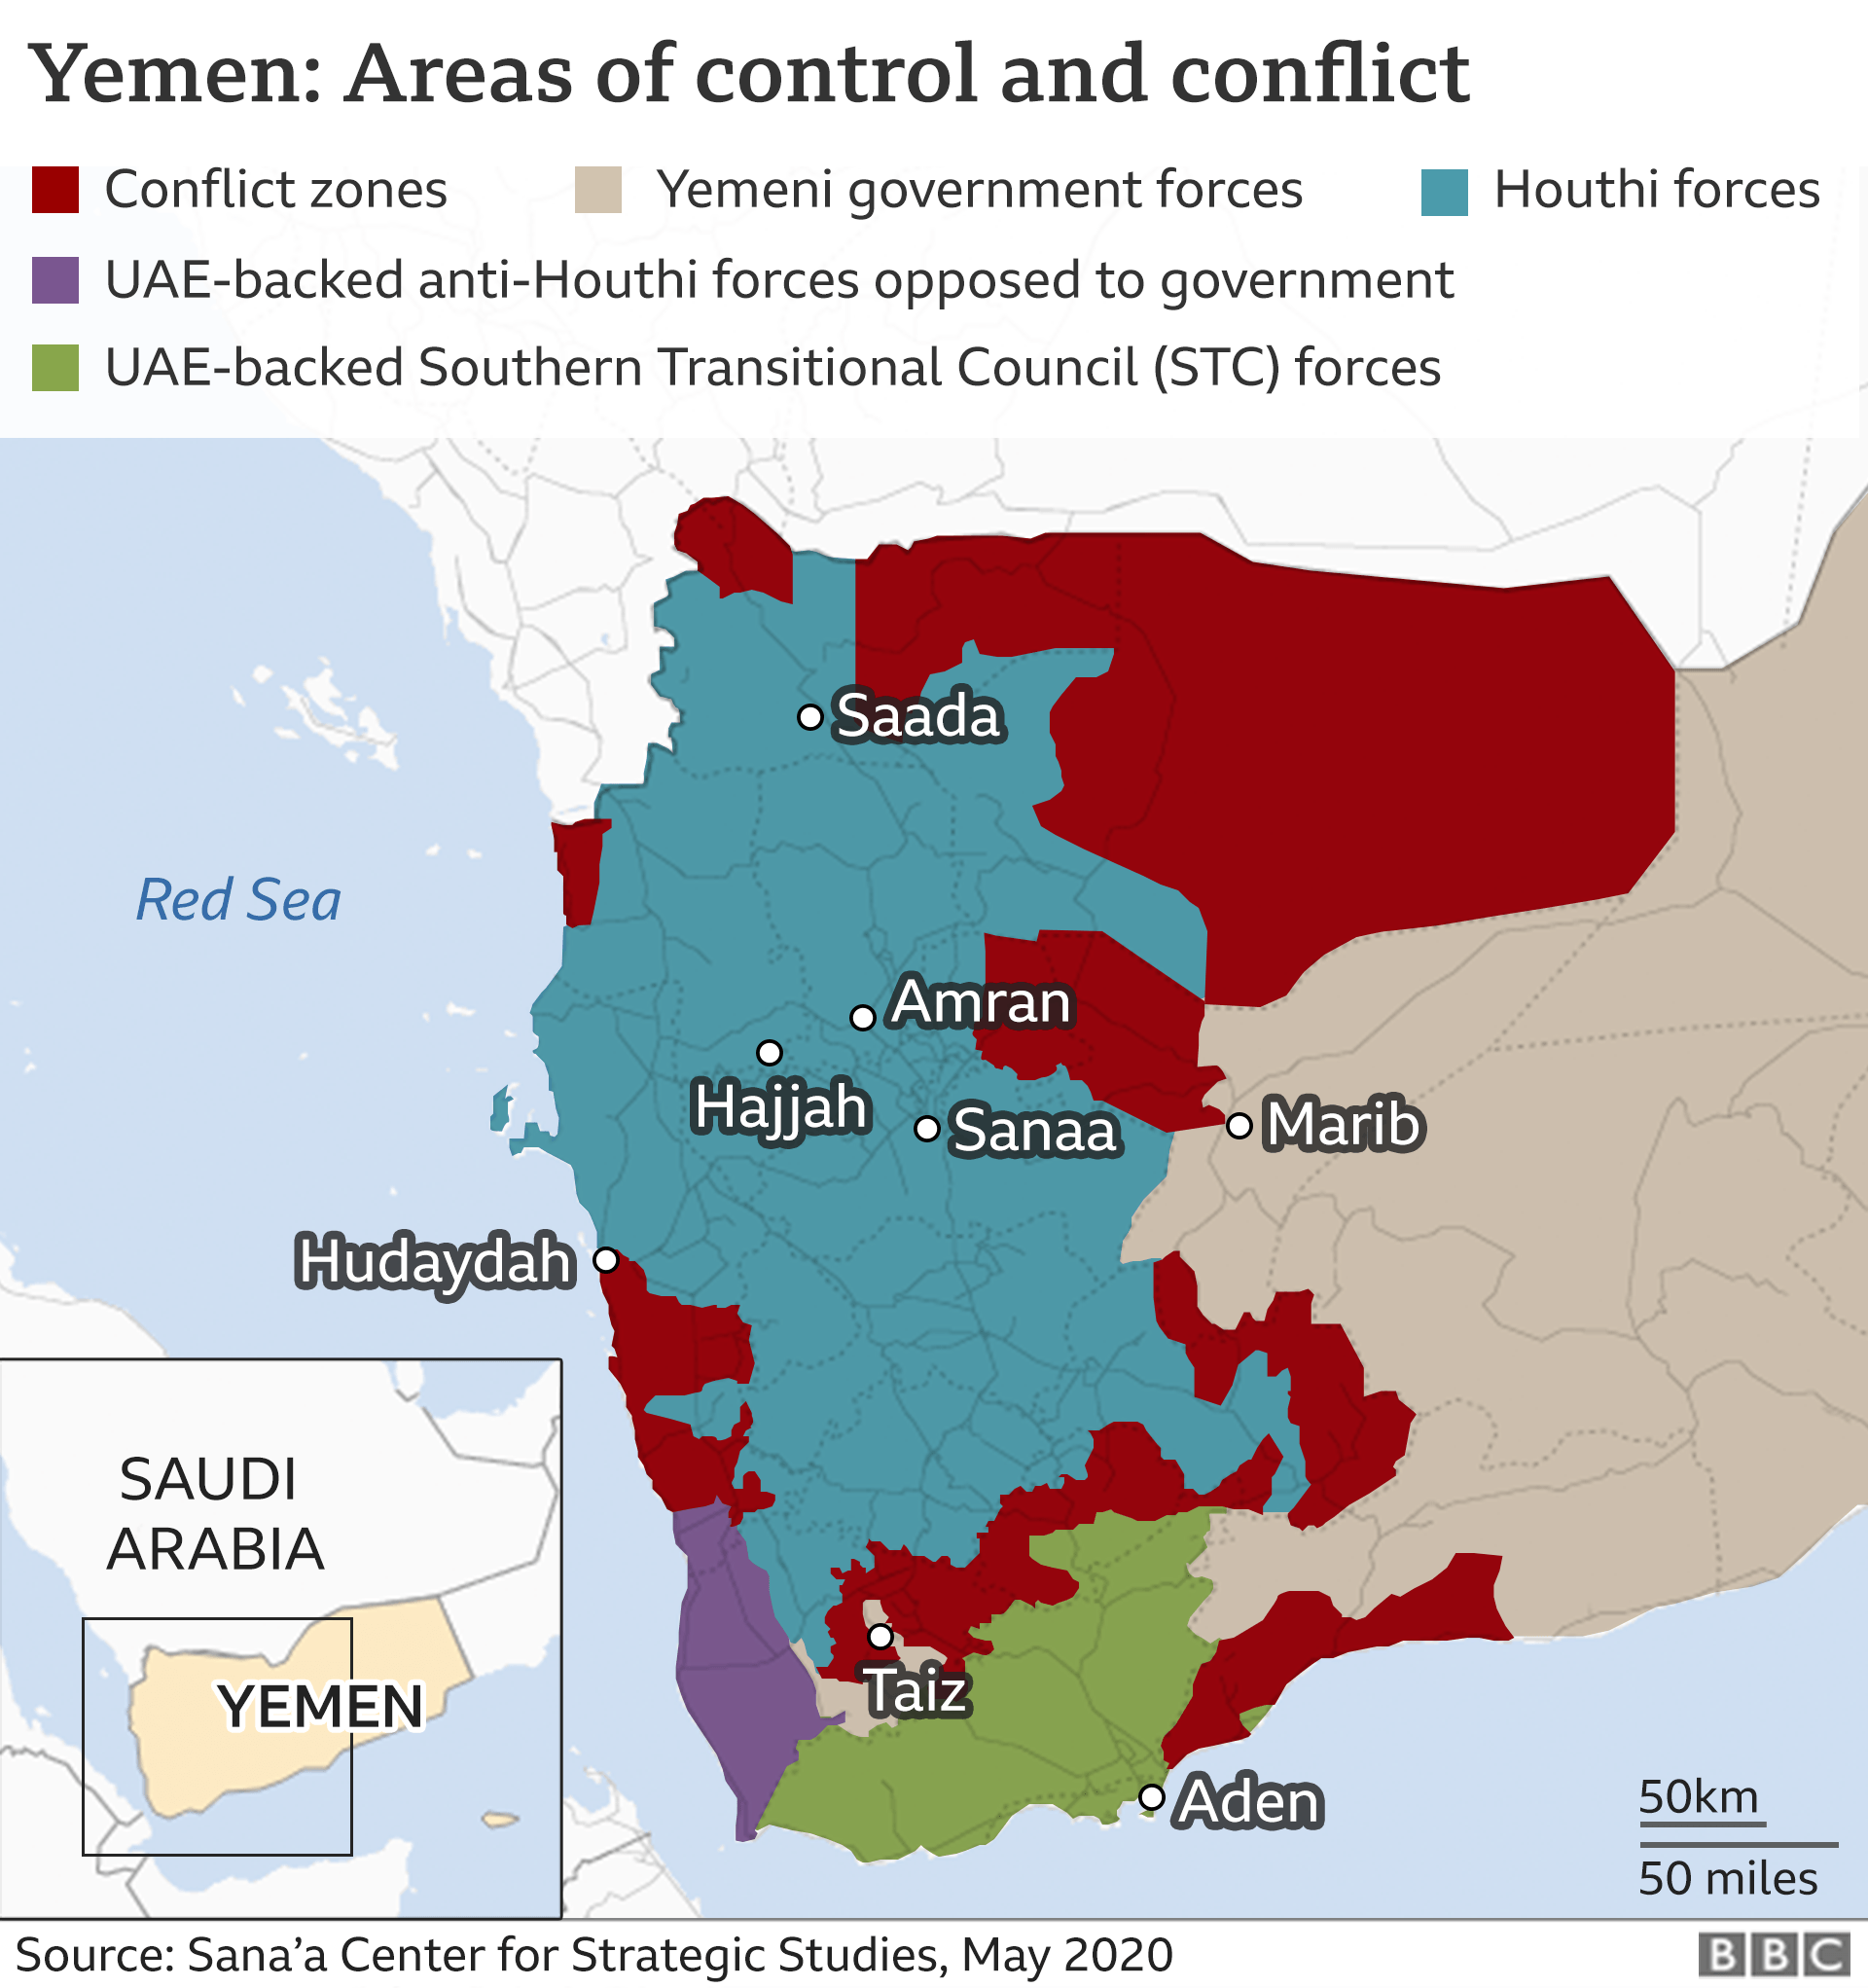 Map of Yemen showing areas of conflict and control (May 2020)